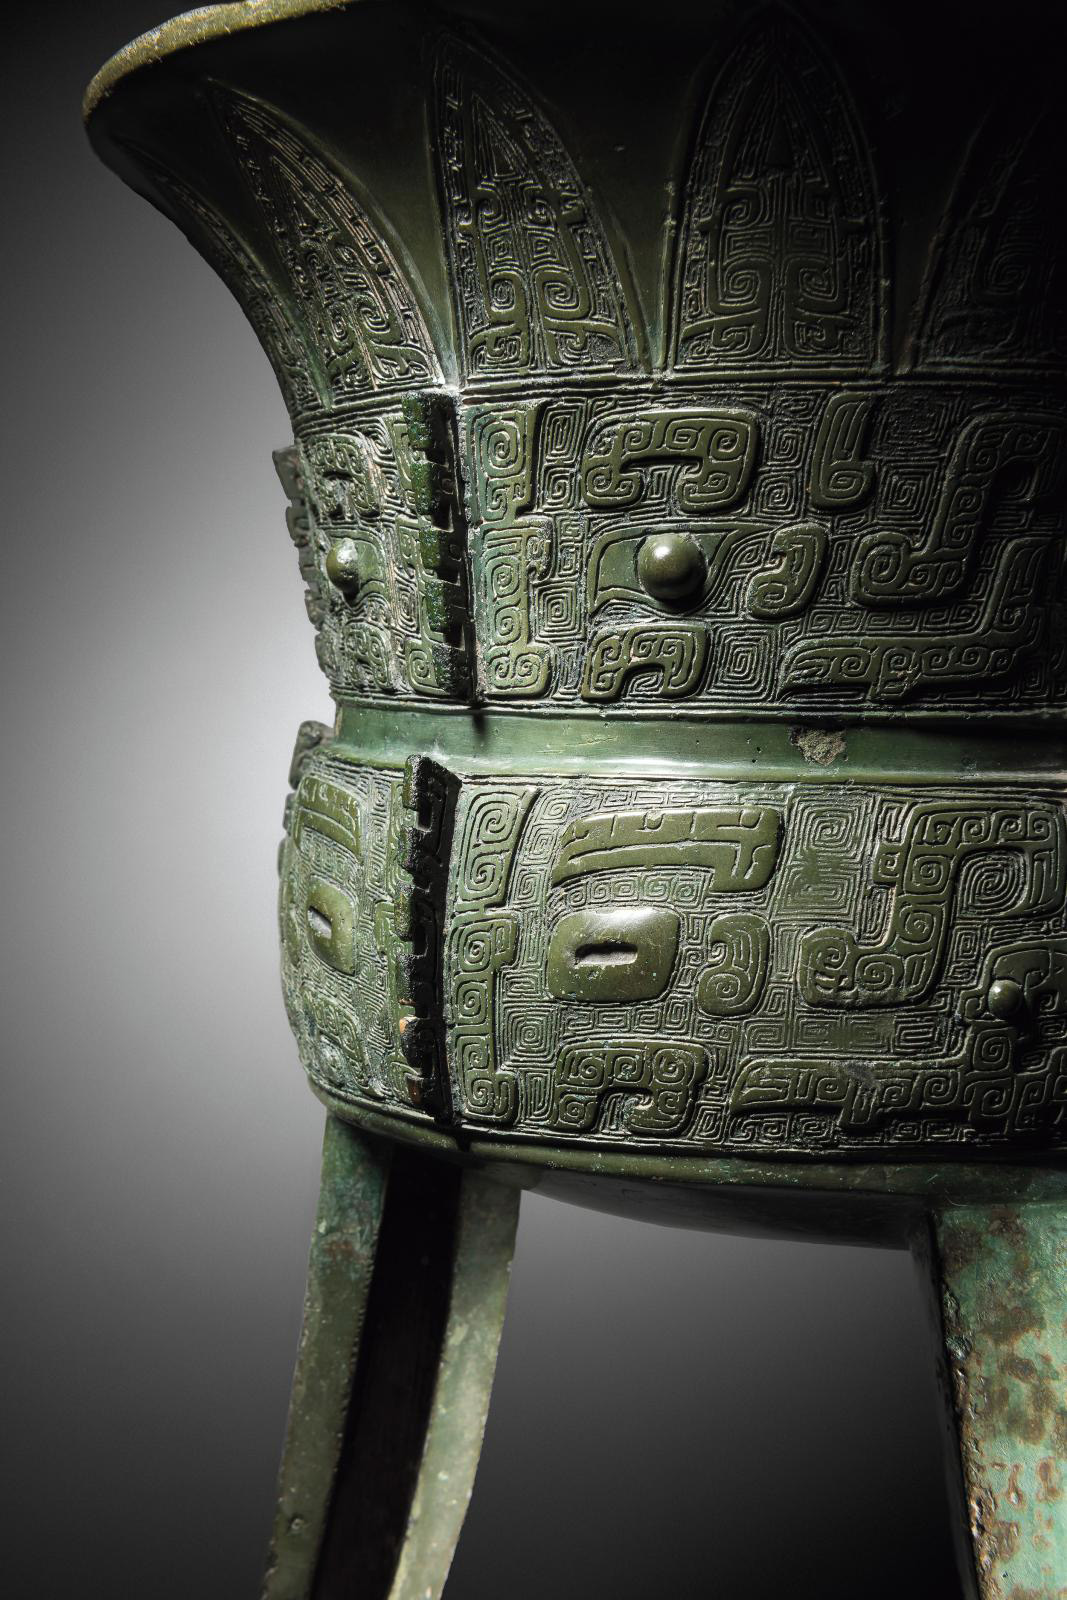 China, Shang dynasty, Anyang period, 14th-12th century BC, jia form fermented beverage vessel, h. 47.5 cm/18.7 in (detail). Christian Deyd